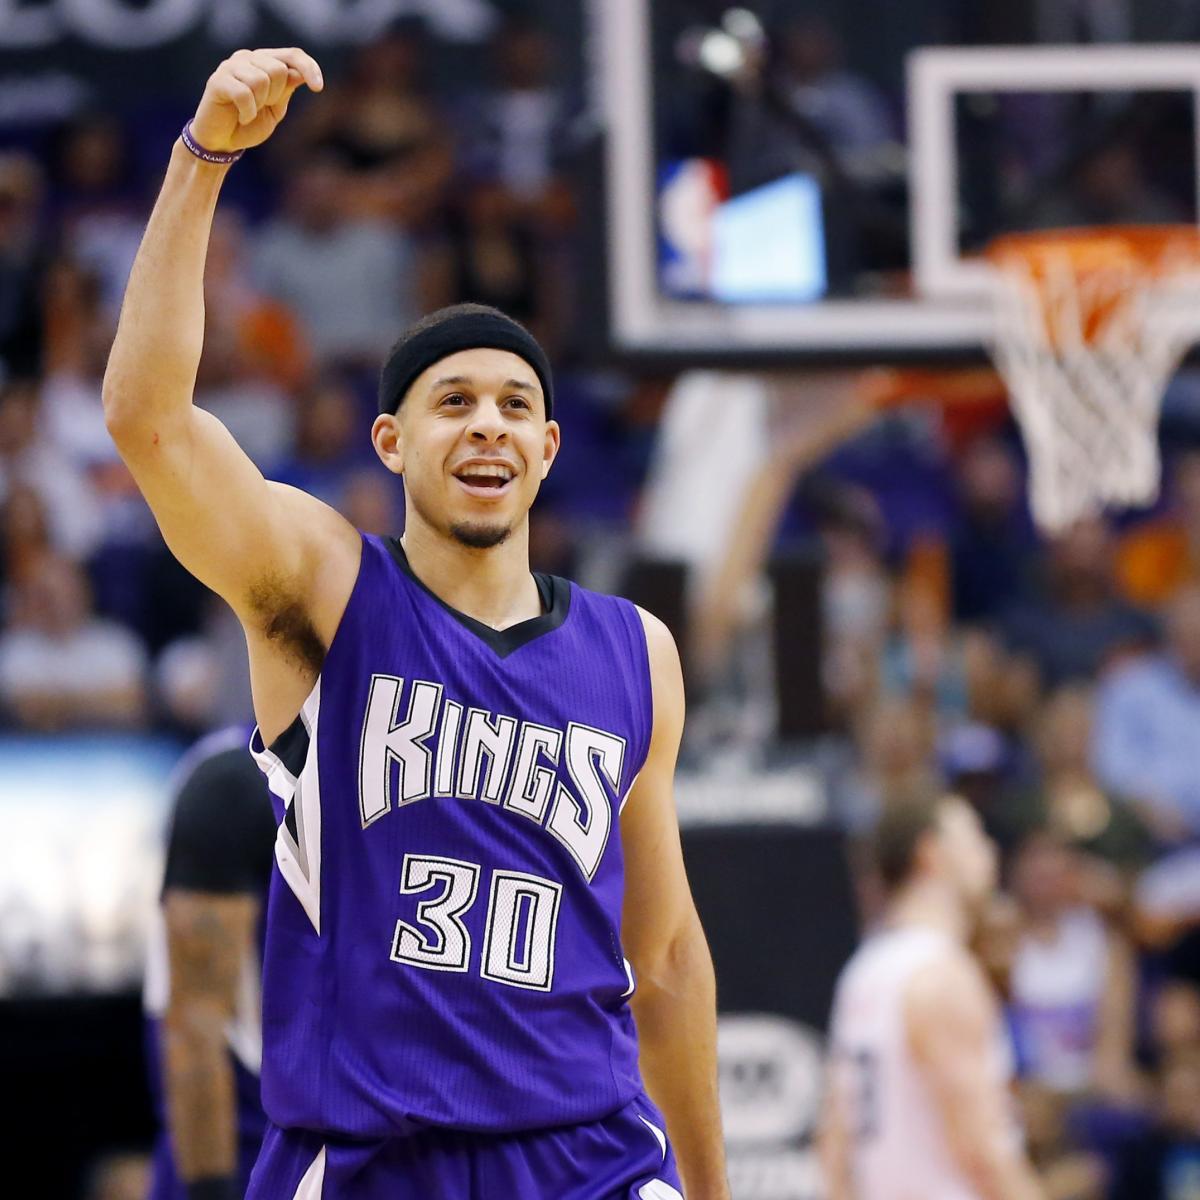 Seth Curry to Reportedly Sign Two-Year, $6 Million Deal With Dallas